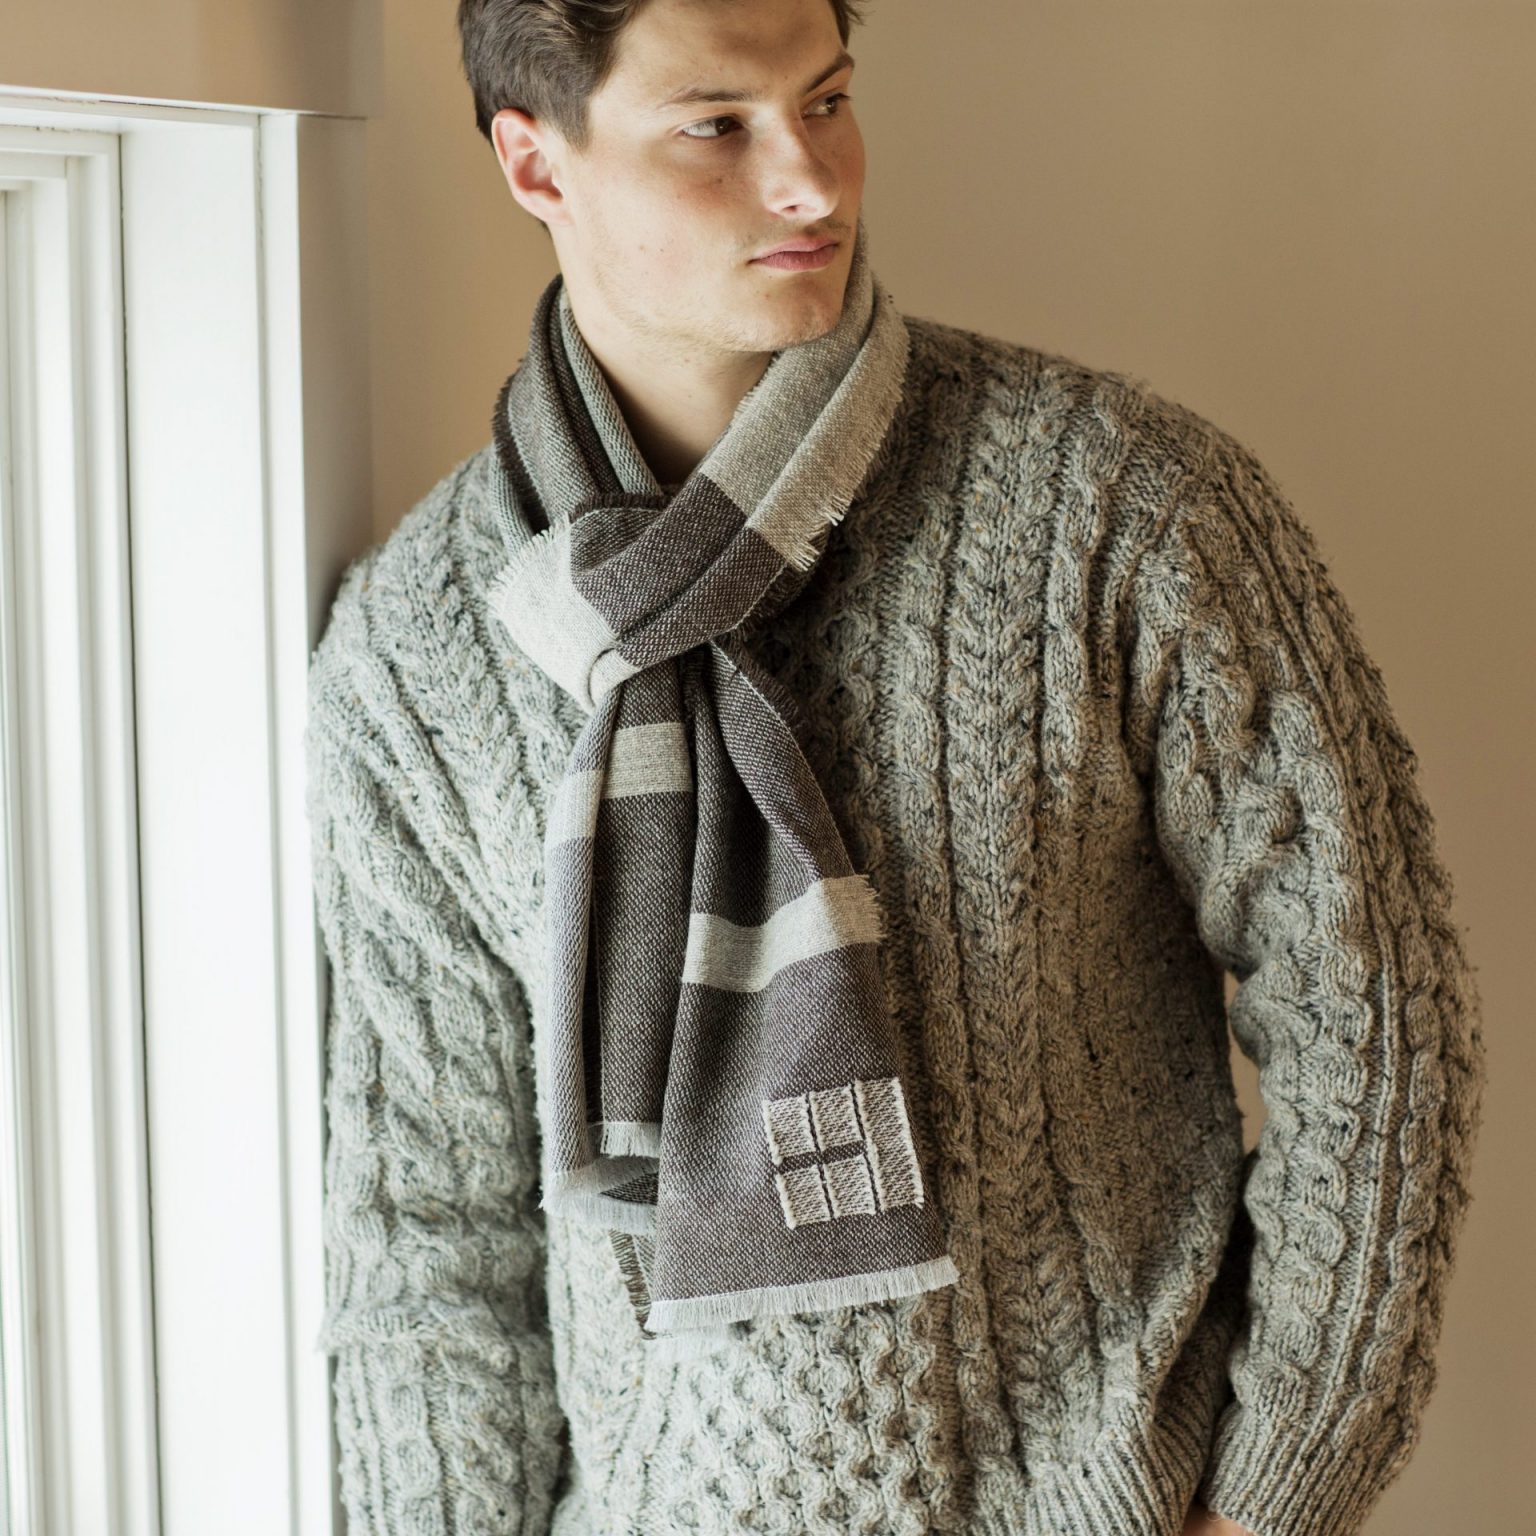 Classic Scarves | Swans Island Company. Made in America.